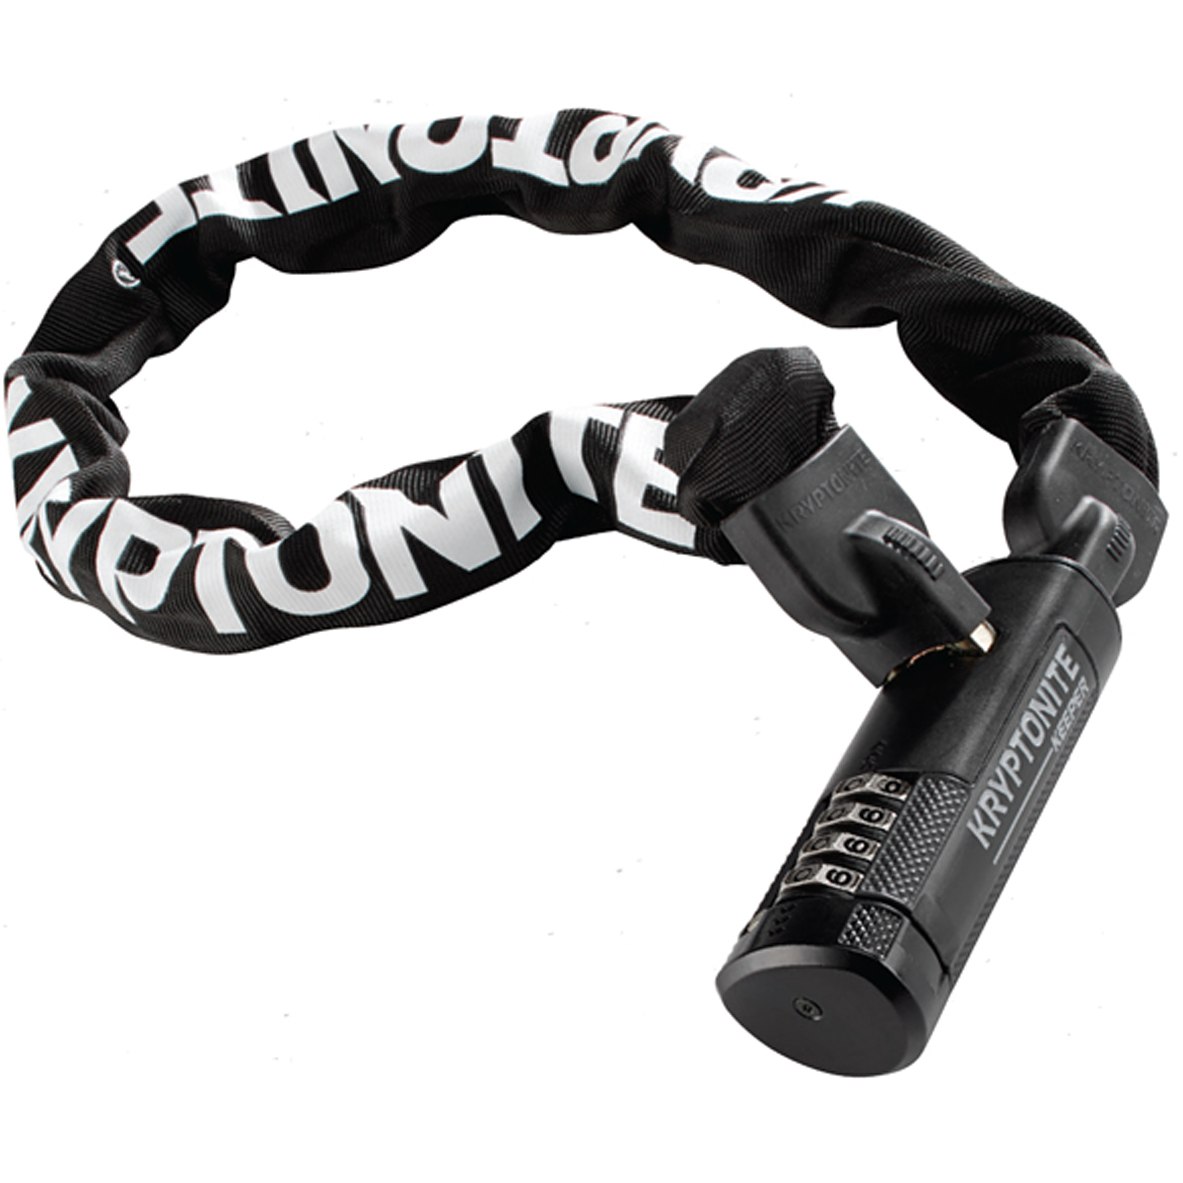 Image of Kryptonite Keeper Combo Integrated Chain 790 Chain Lock